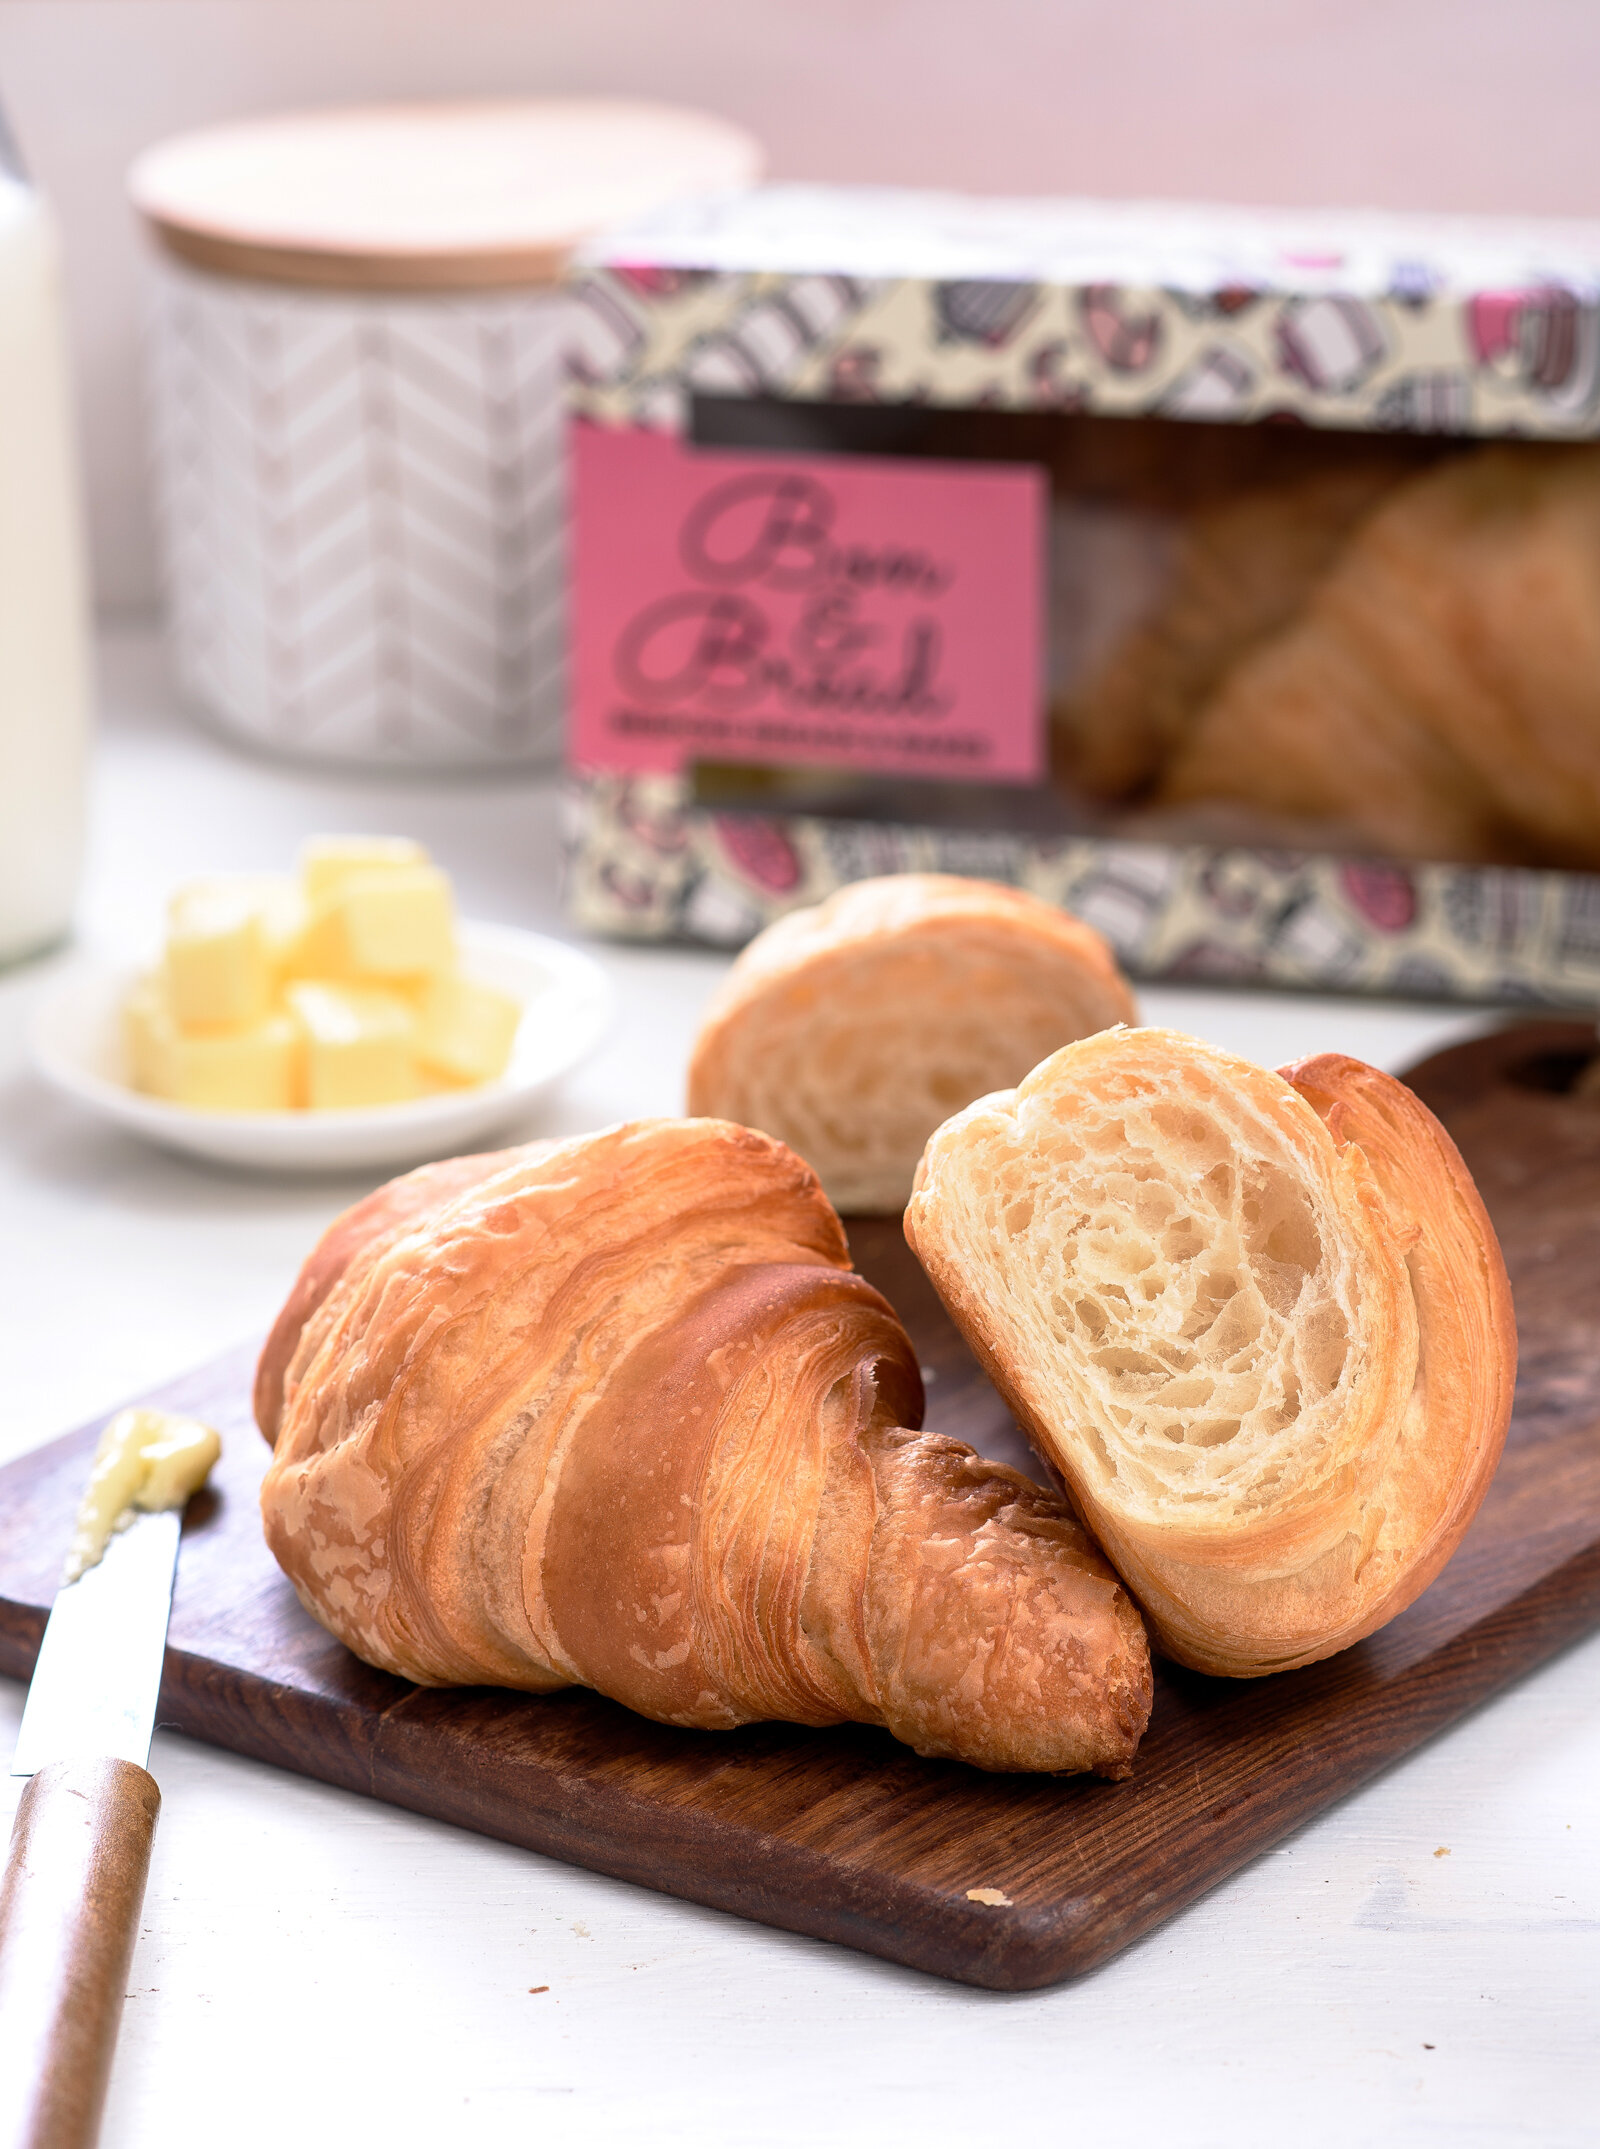 bon-and-bread-bakery-styling-bangalore-product-commercial-photography-aalok-das-croissant-butter.jpg